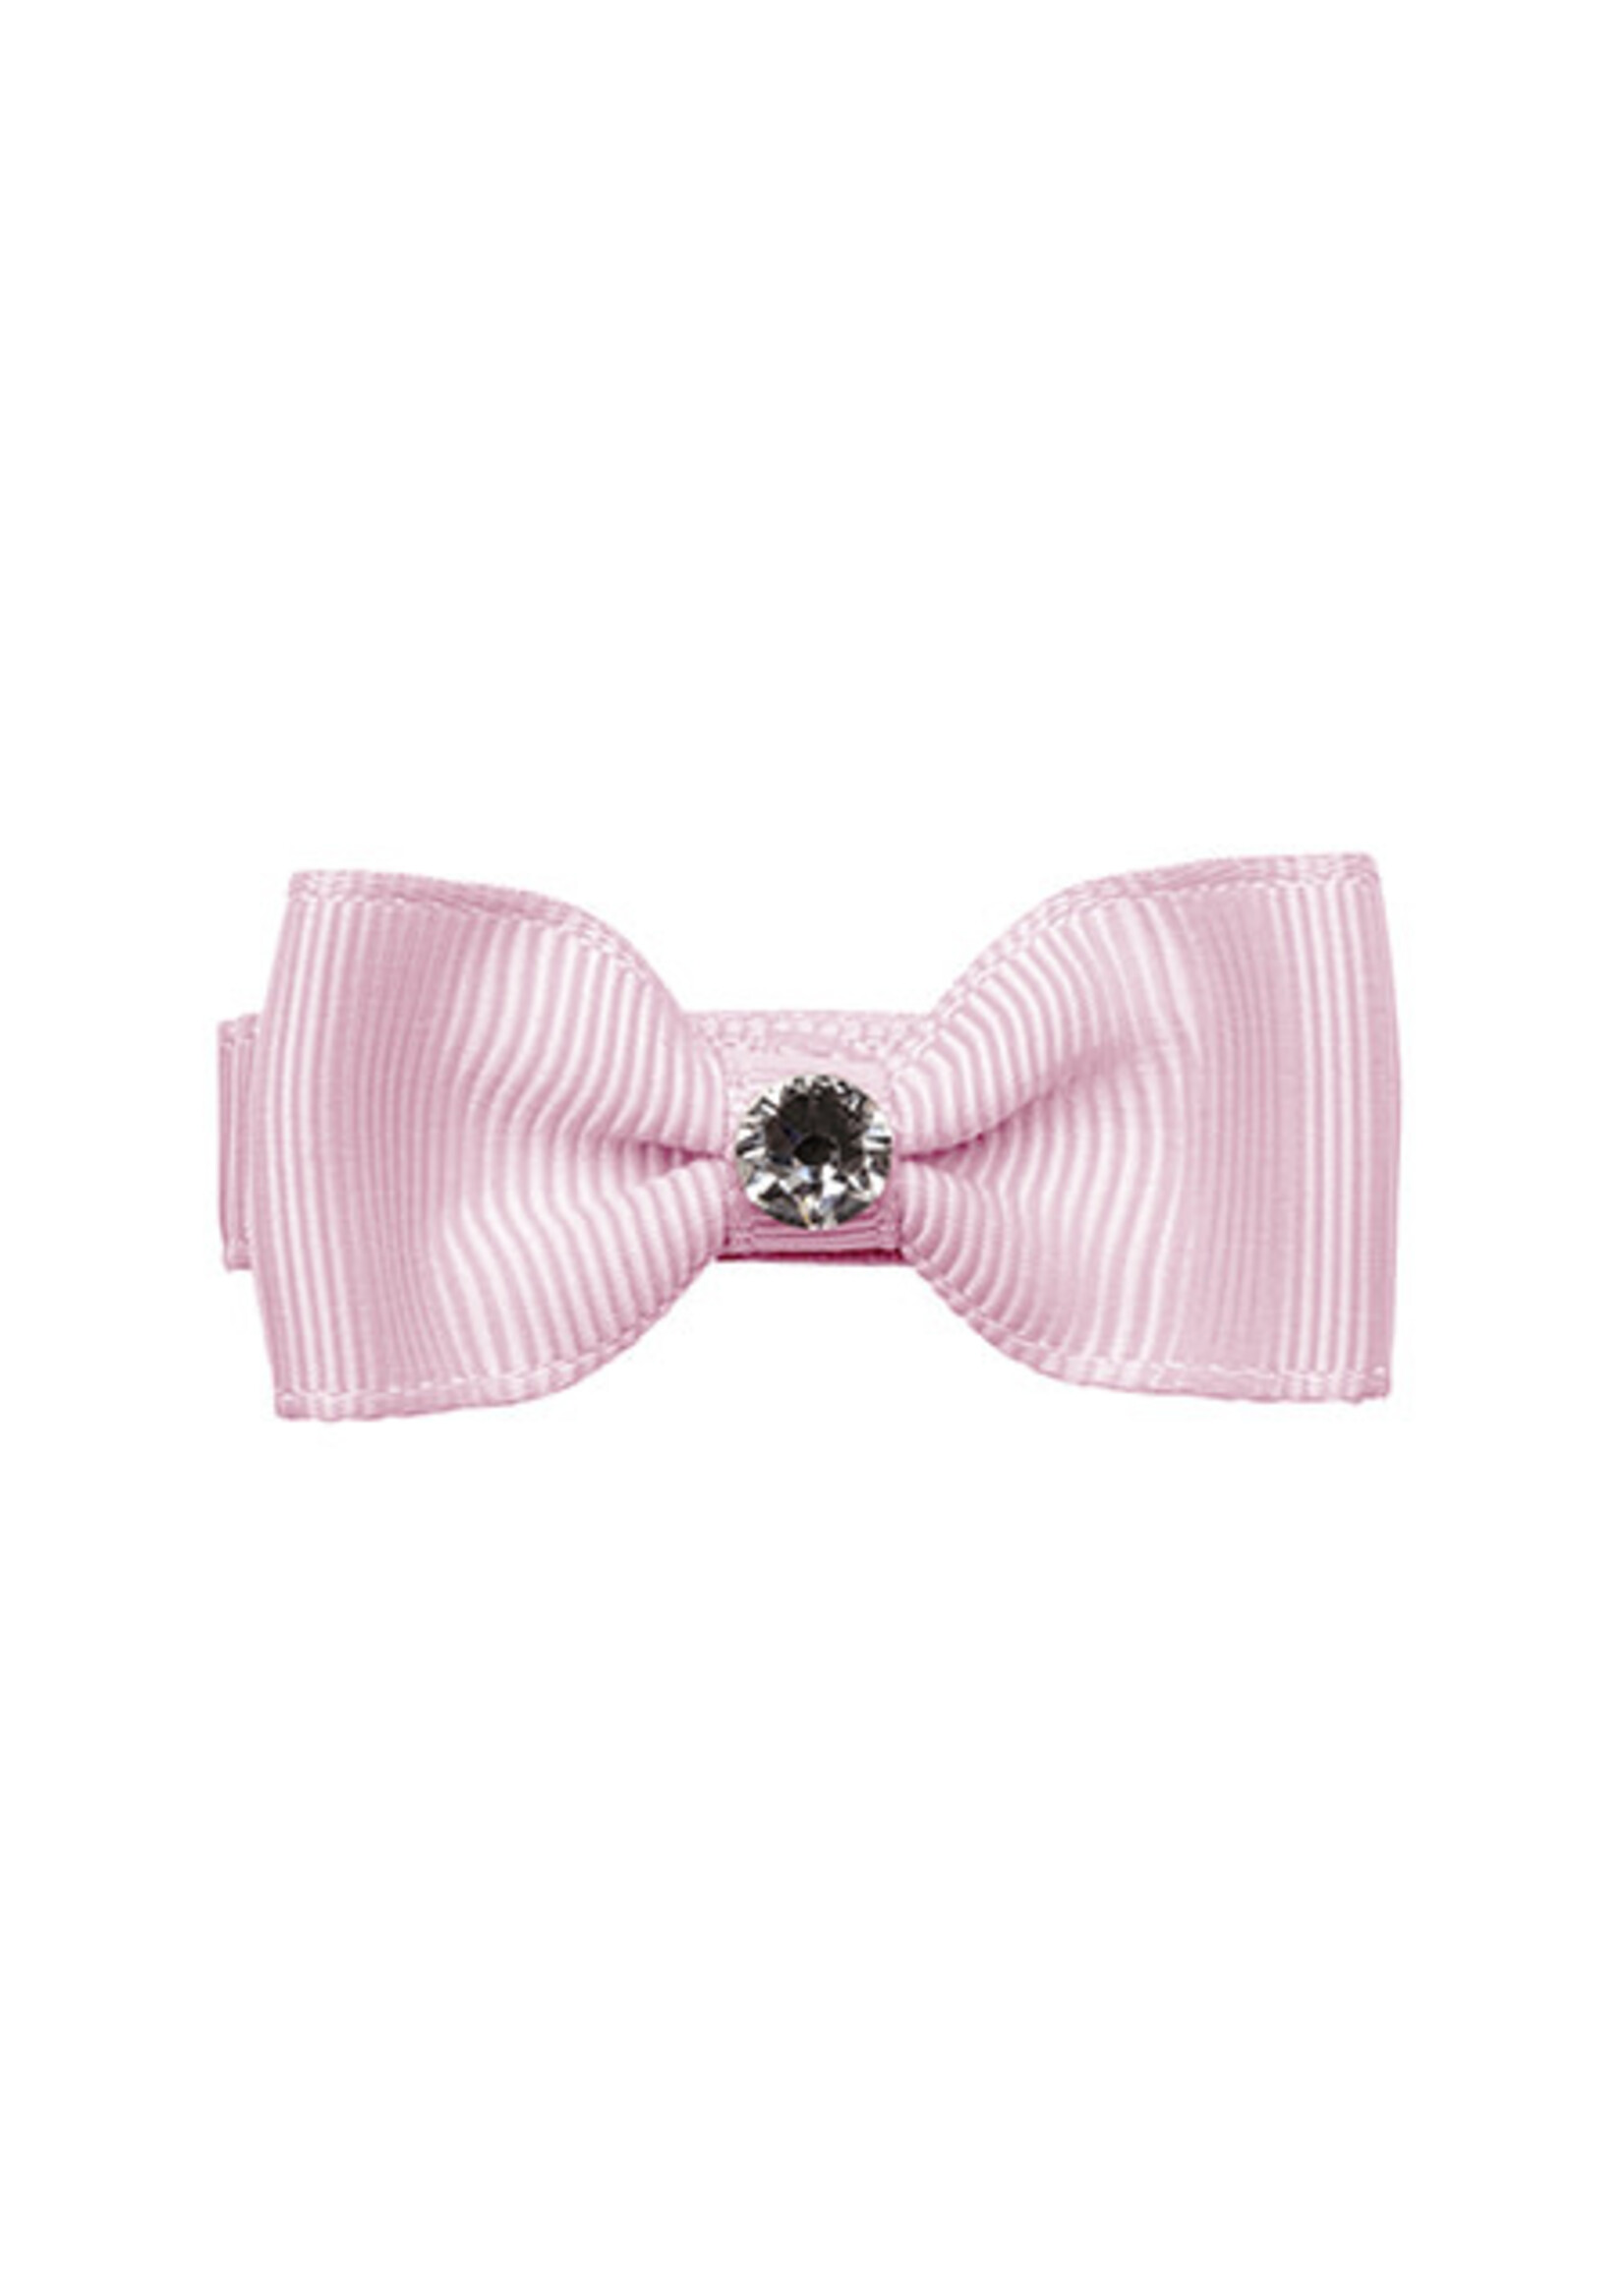 Prinsessefin Sofia Icy Pink - Prinsessefin